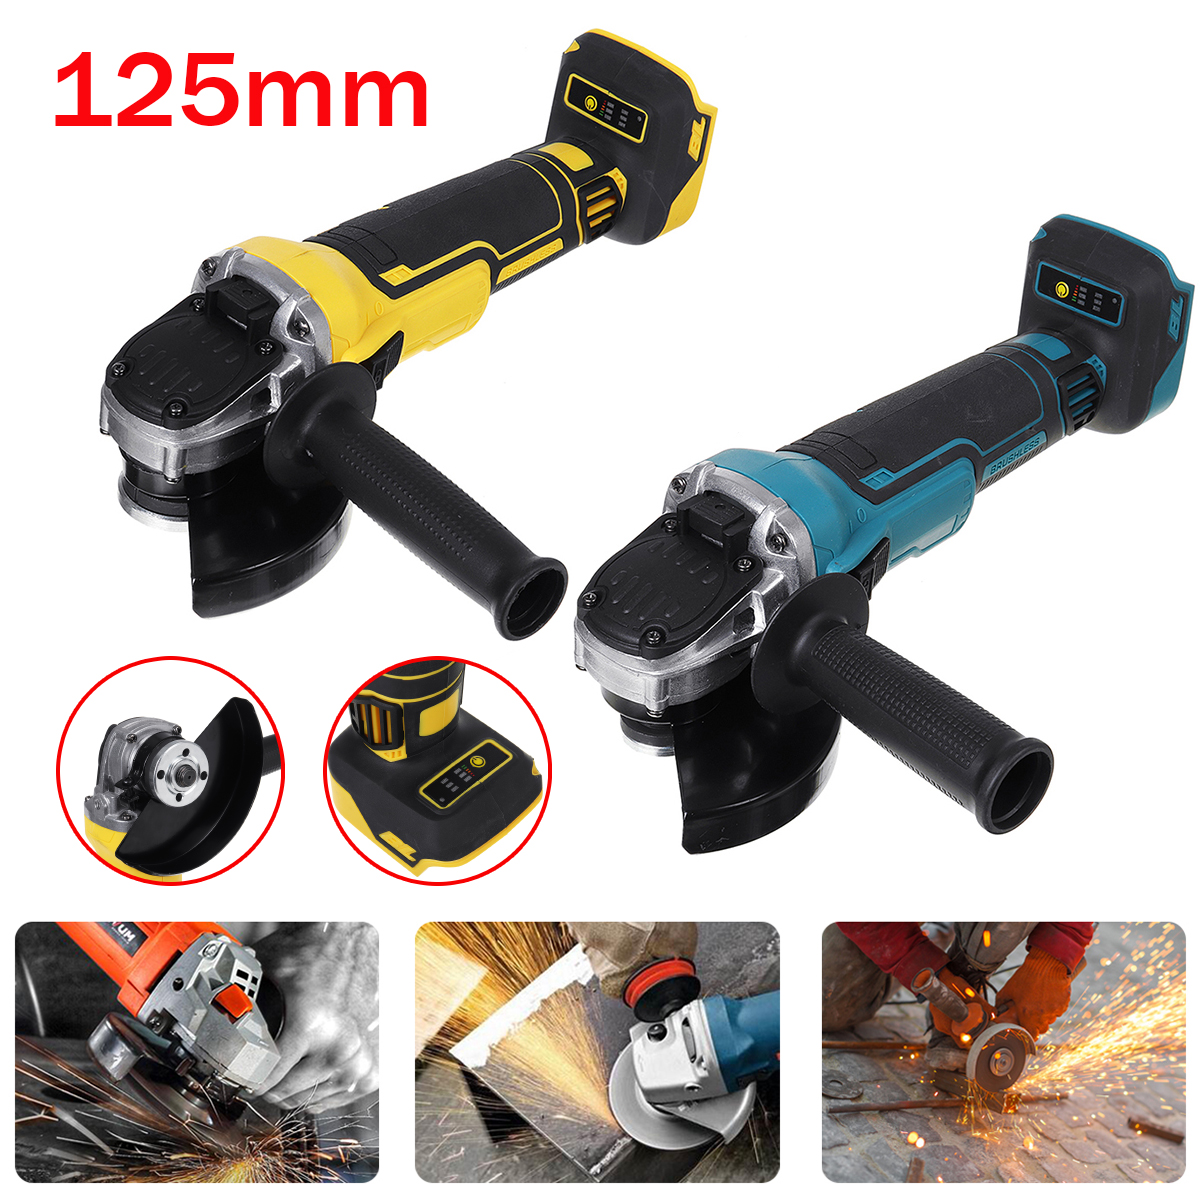 Electric-Brushless-Cordless-Angle-Grinder-M10-125mm-Cut-for-Makita-18V-Battery-1791879-3